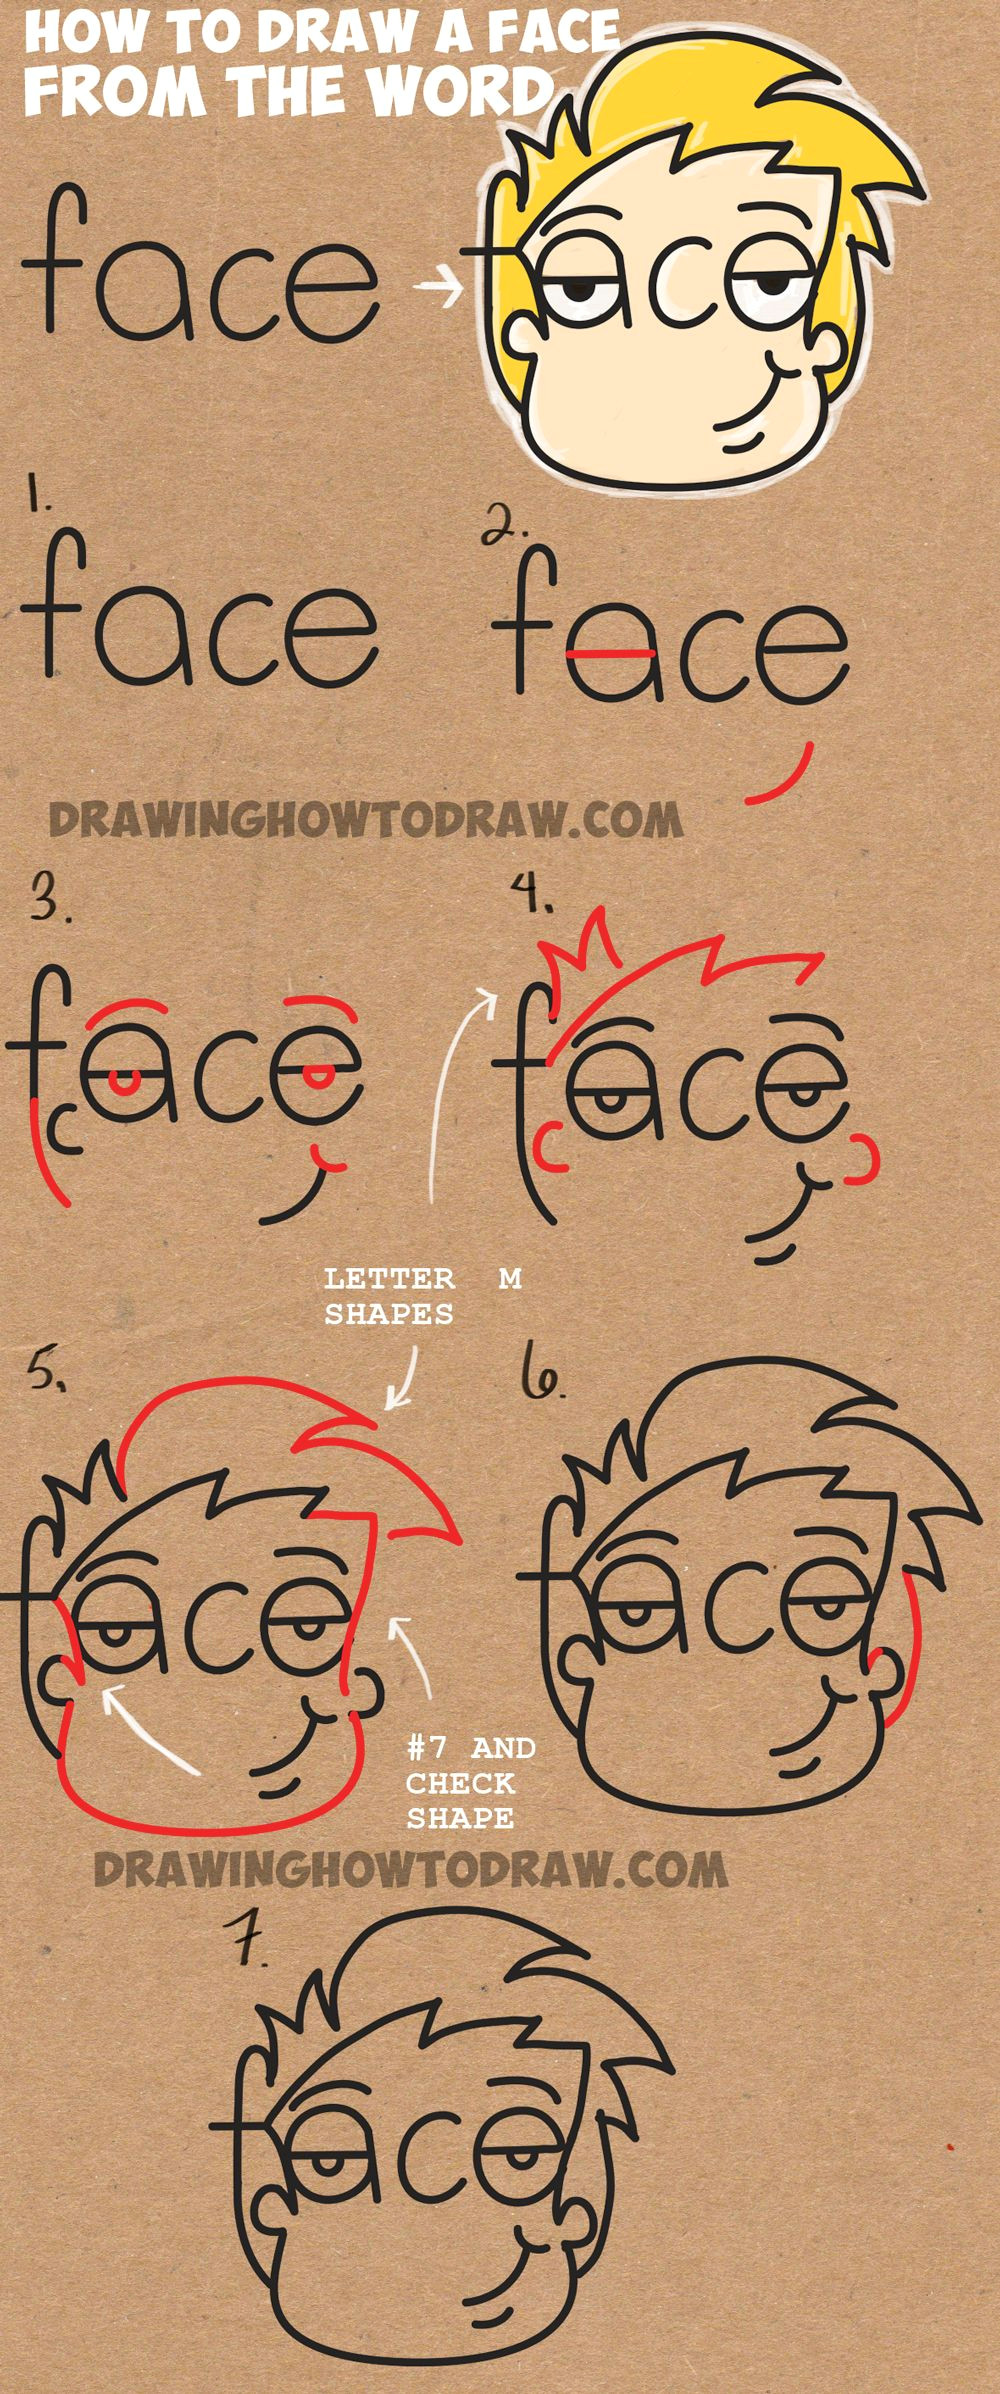 Drawing Cartoons for Dummies How to Draw Cartoon Faces From the Word Face Easy Step by Step